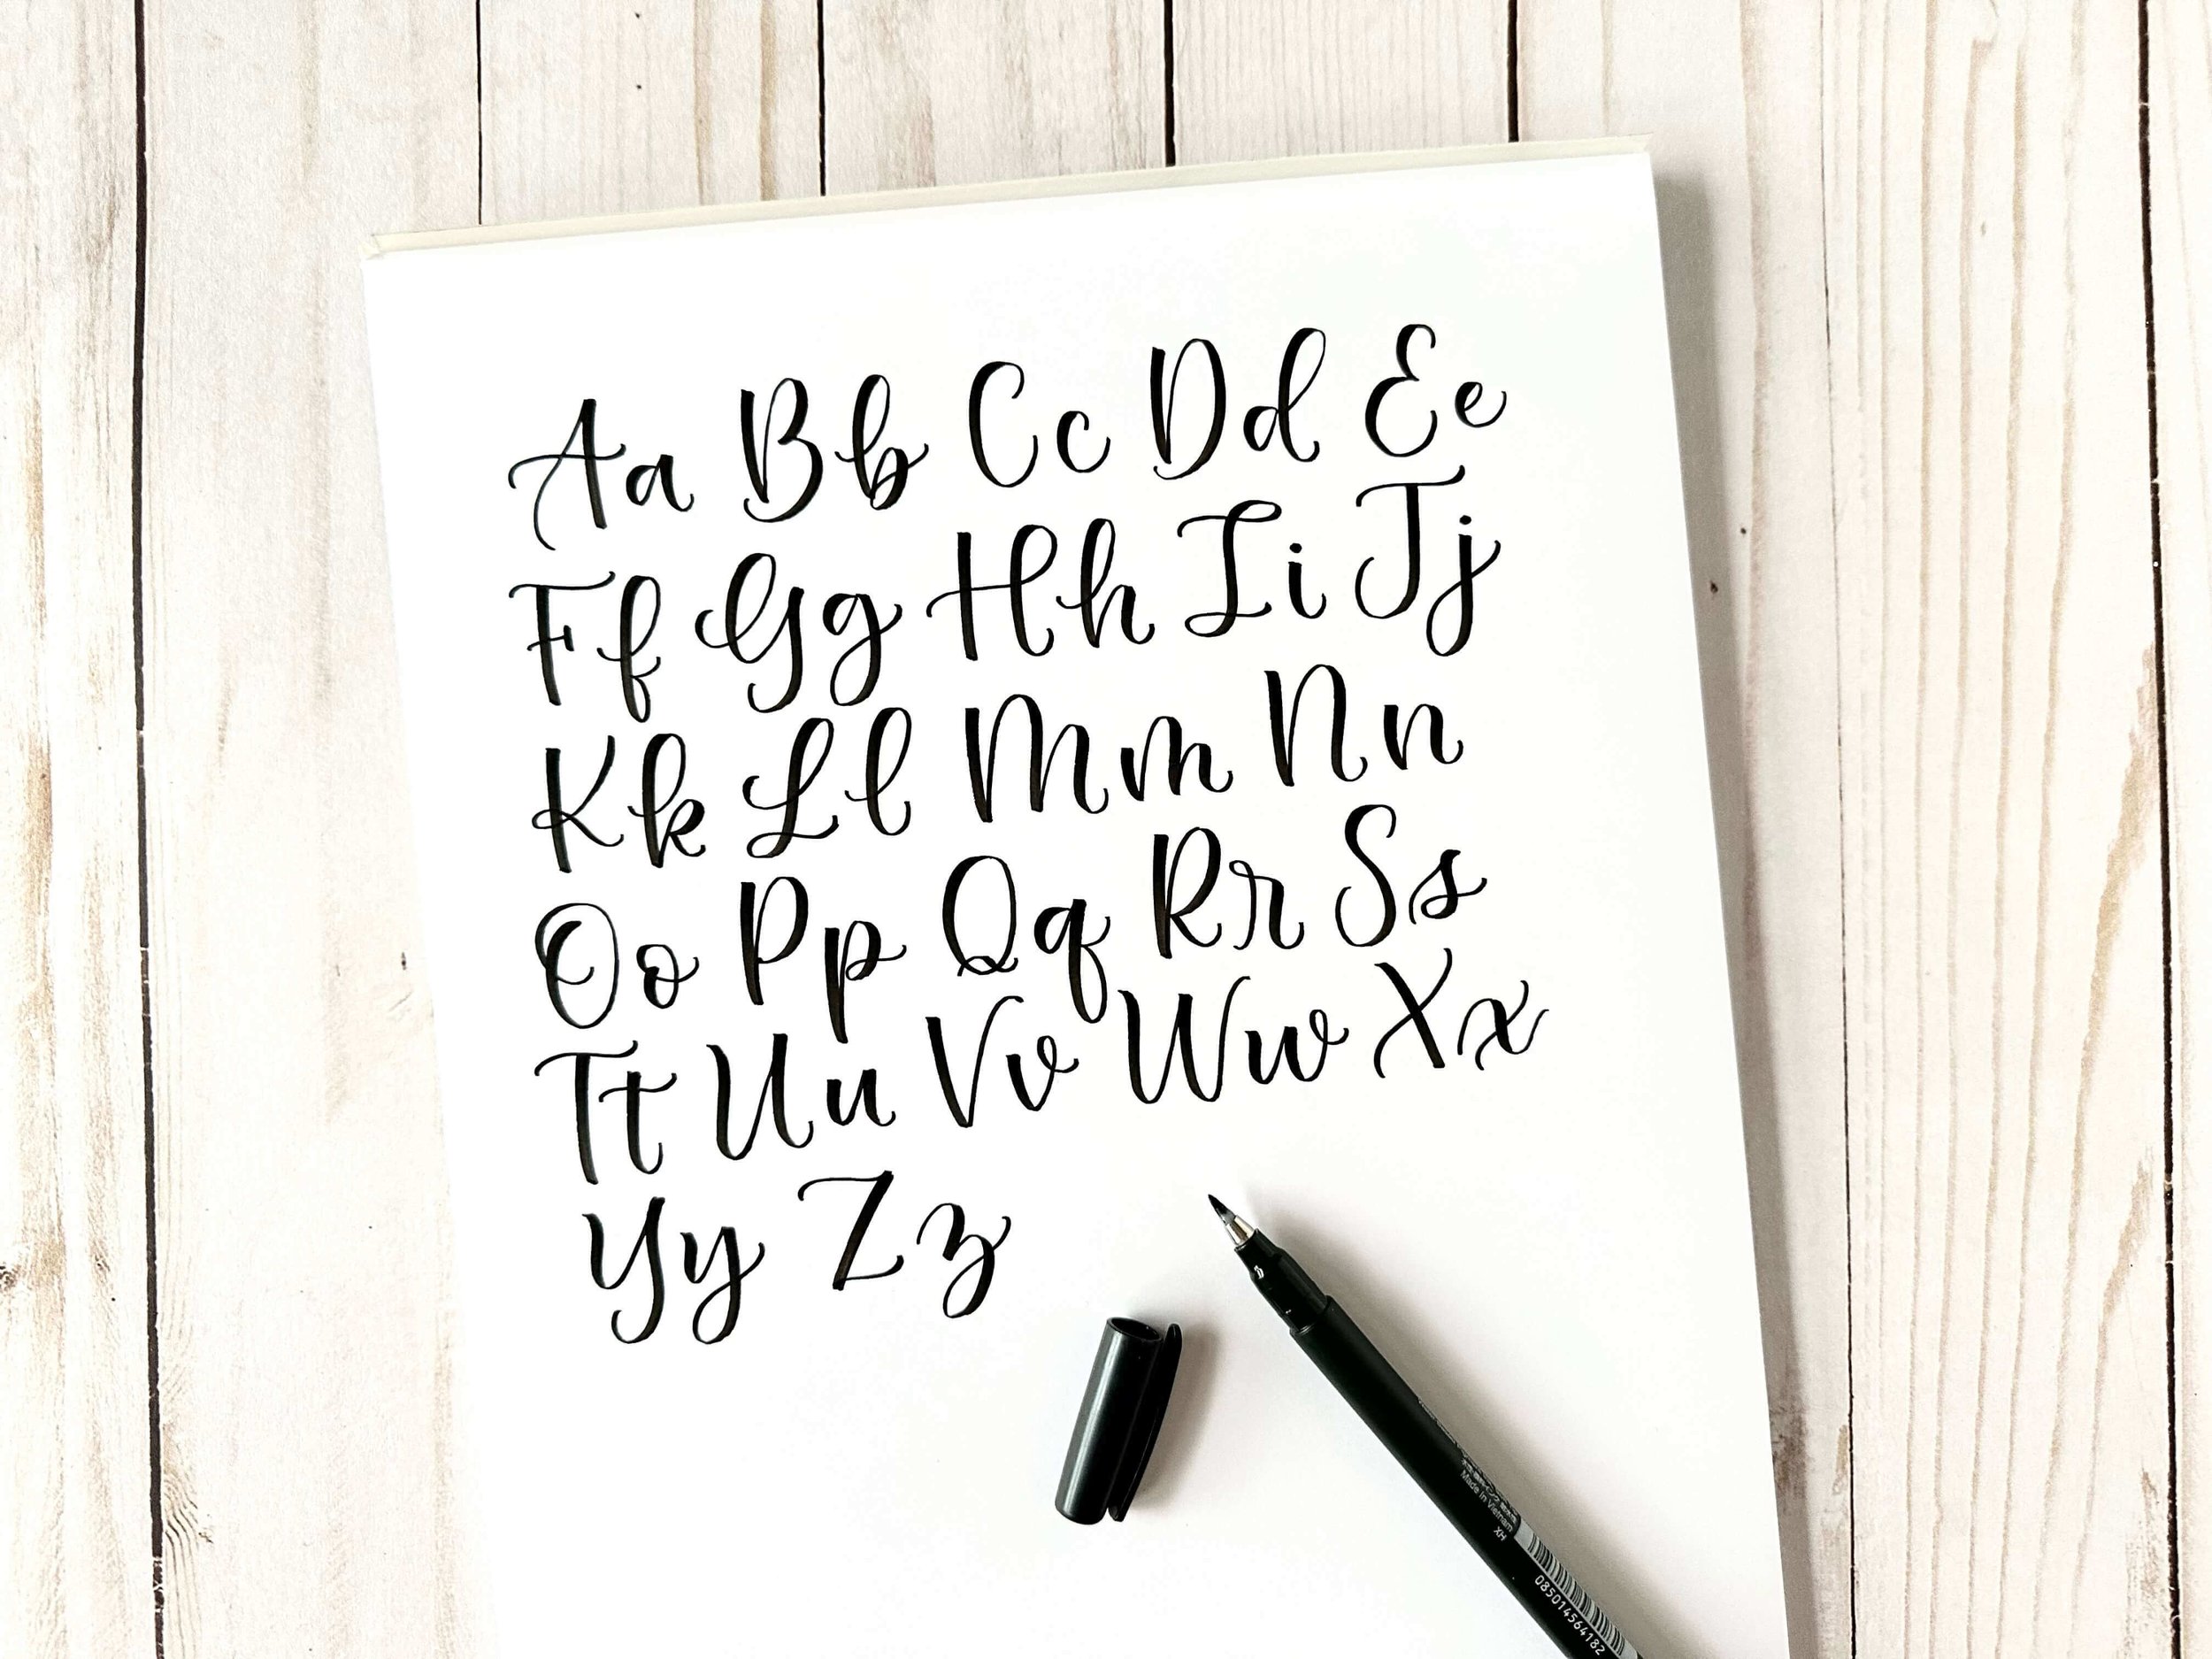 Brush Lettering Workbook: How to Writing in a Modern Calligraphy